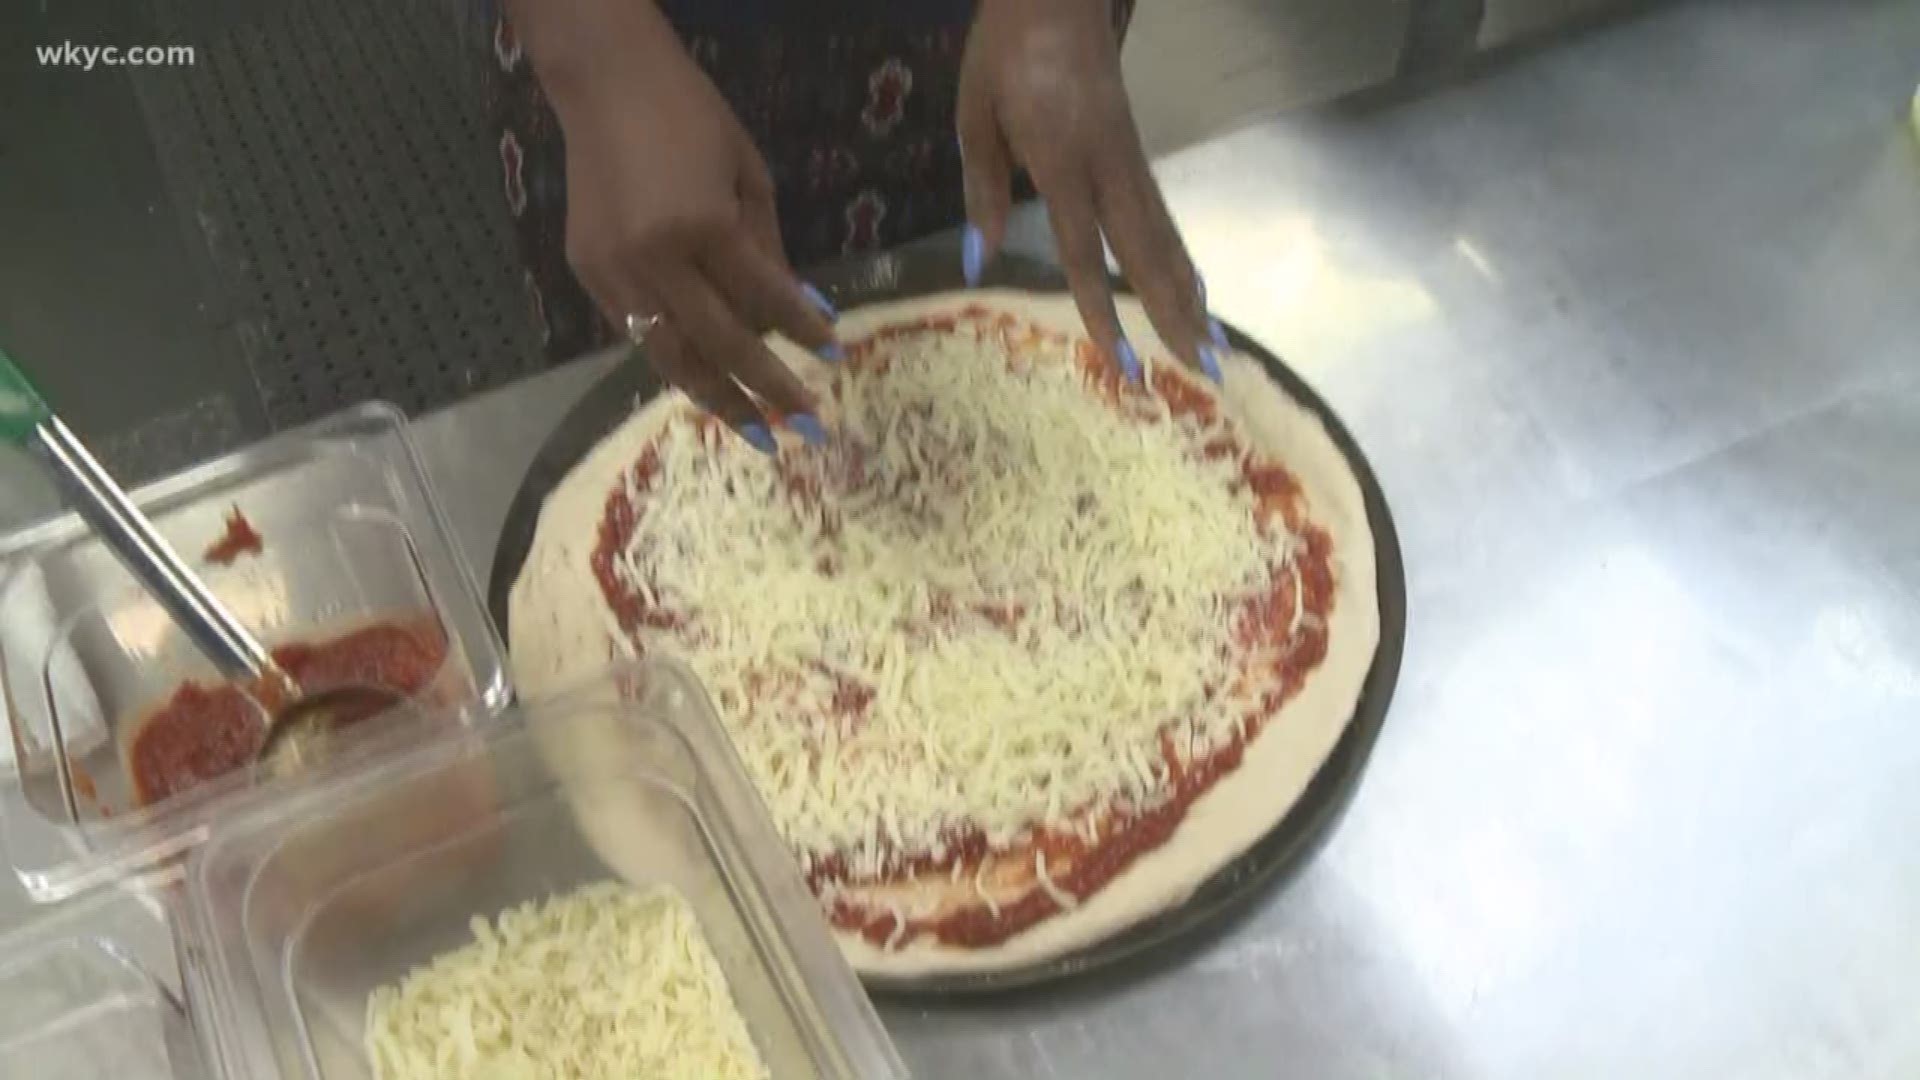 July 18, 2019: Ordering a pizza from here is actually helping make a difference in the community. See how Edwins and Ohio City Pizzeria are changing lives in Northeast Ohio.